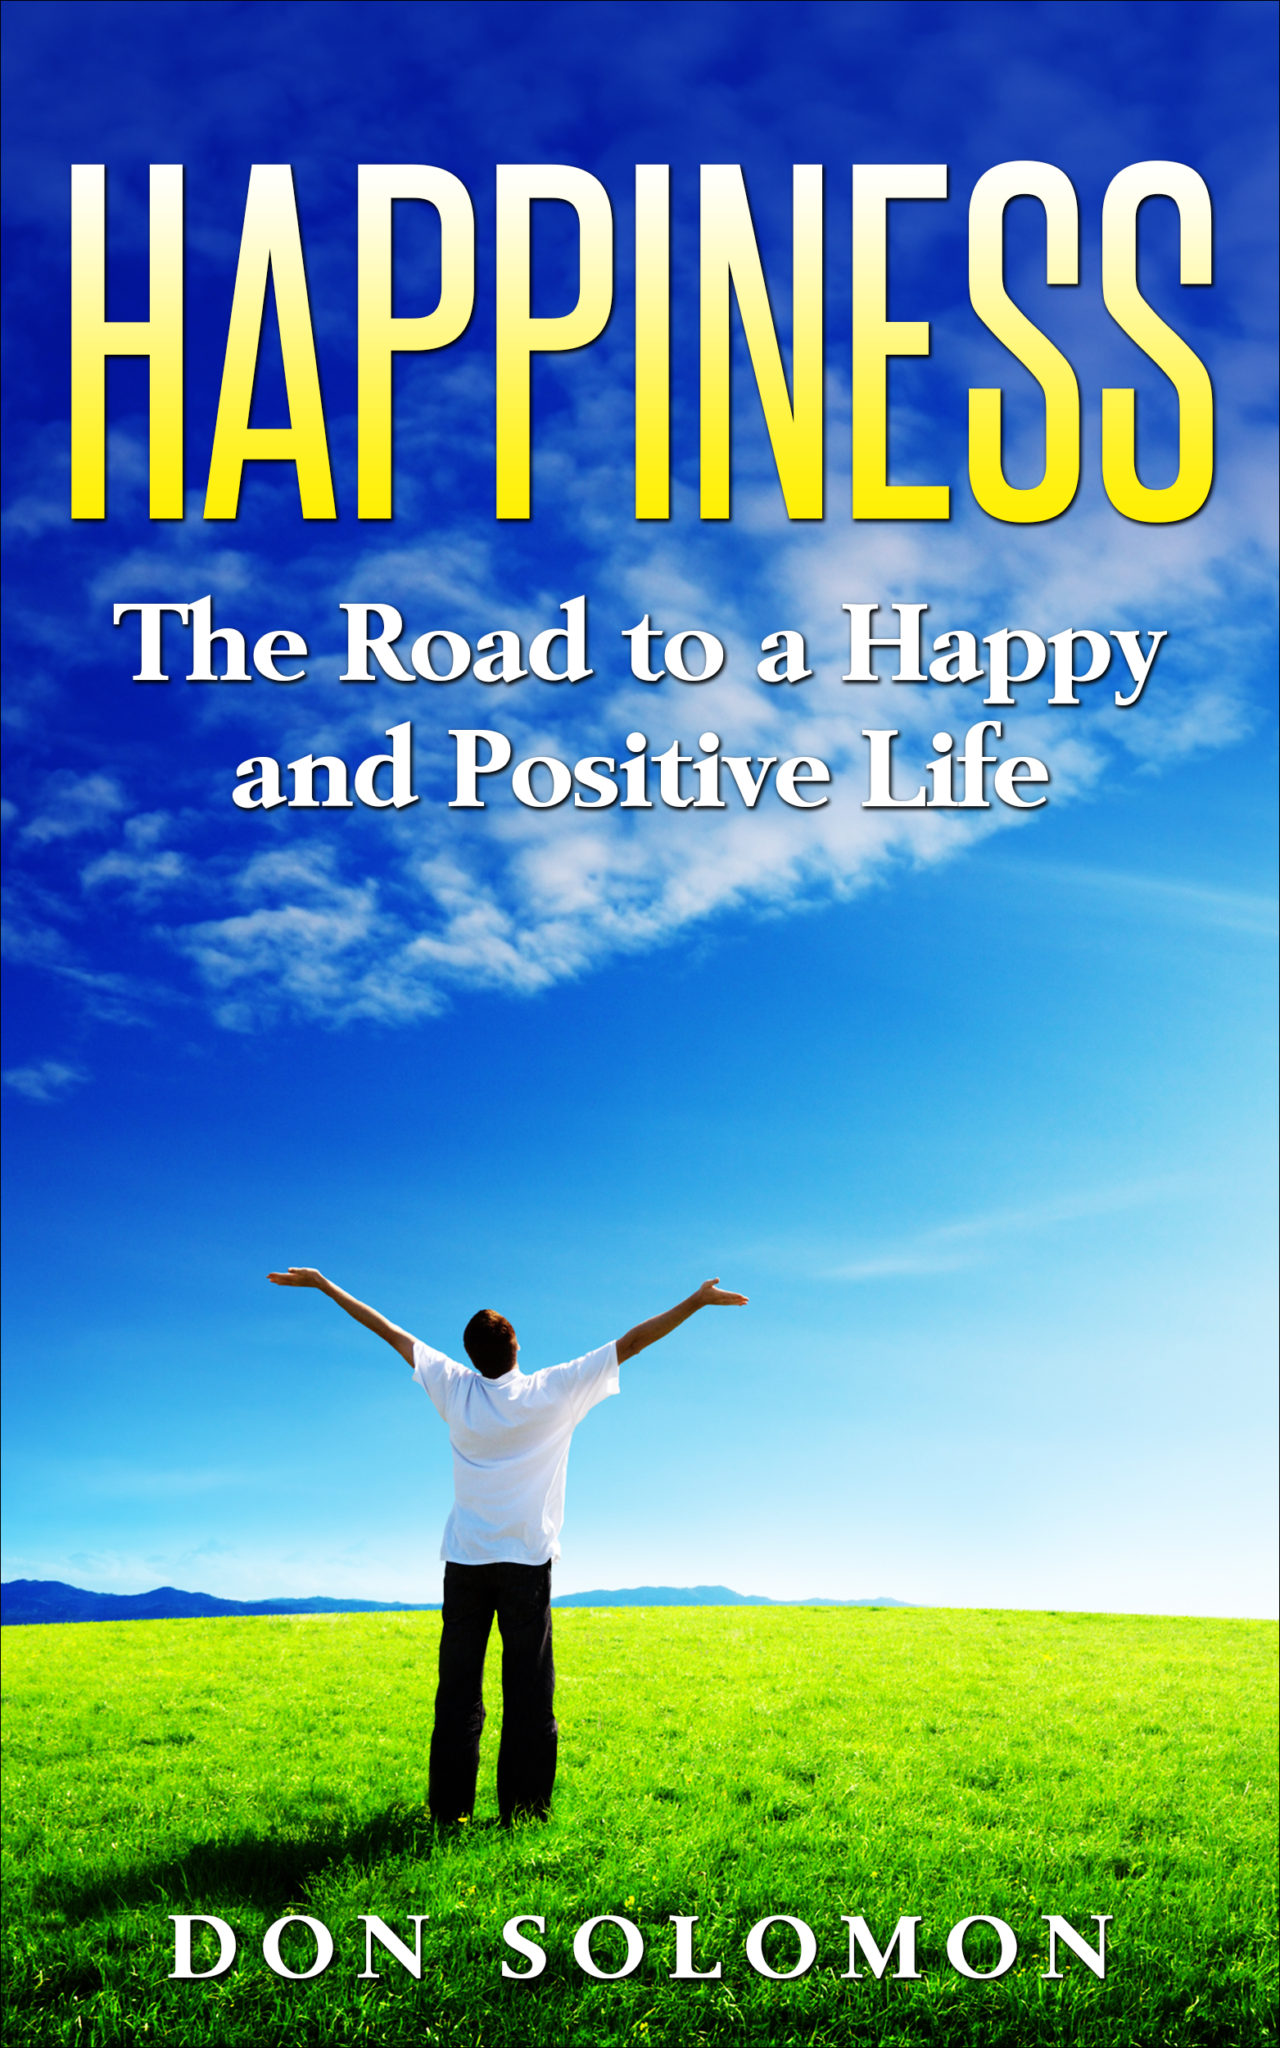 FREE: Happiness: The Road To A Happy And Positive Life by Don Solomon